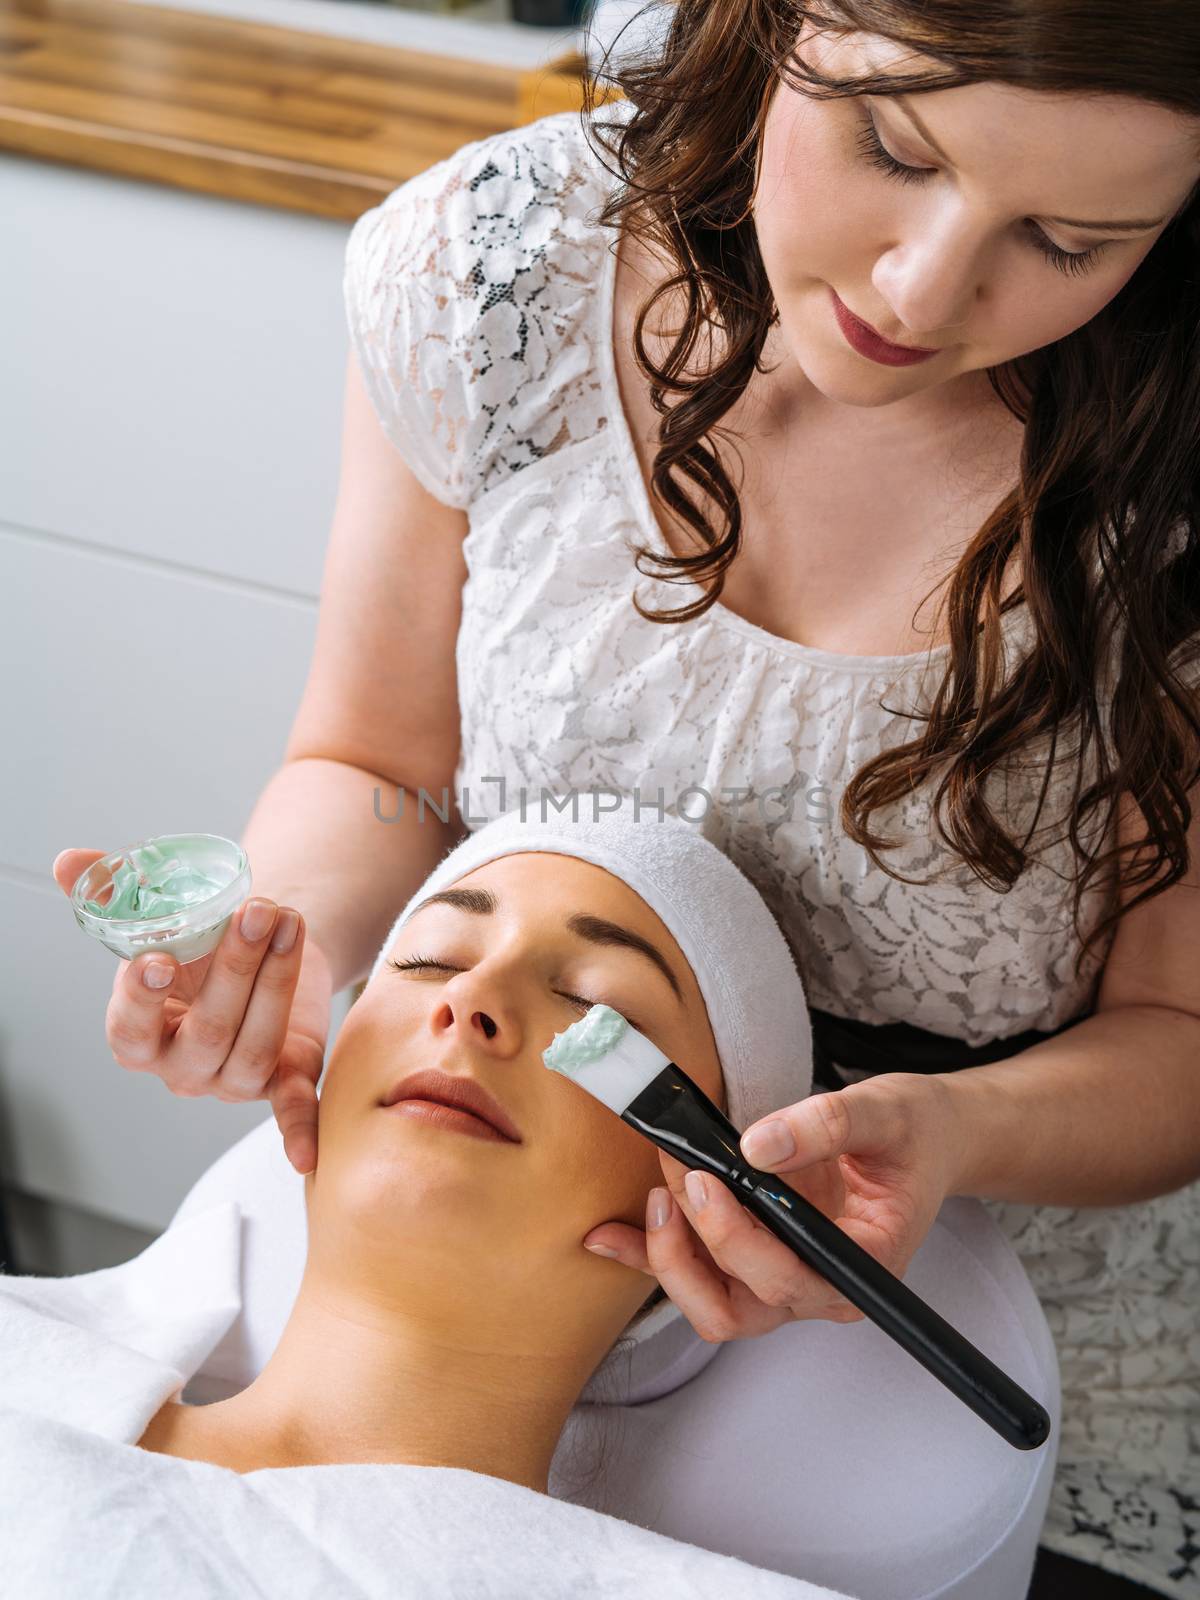 Facial in the salon by sumners